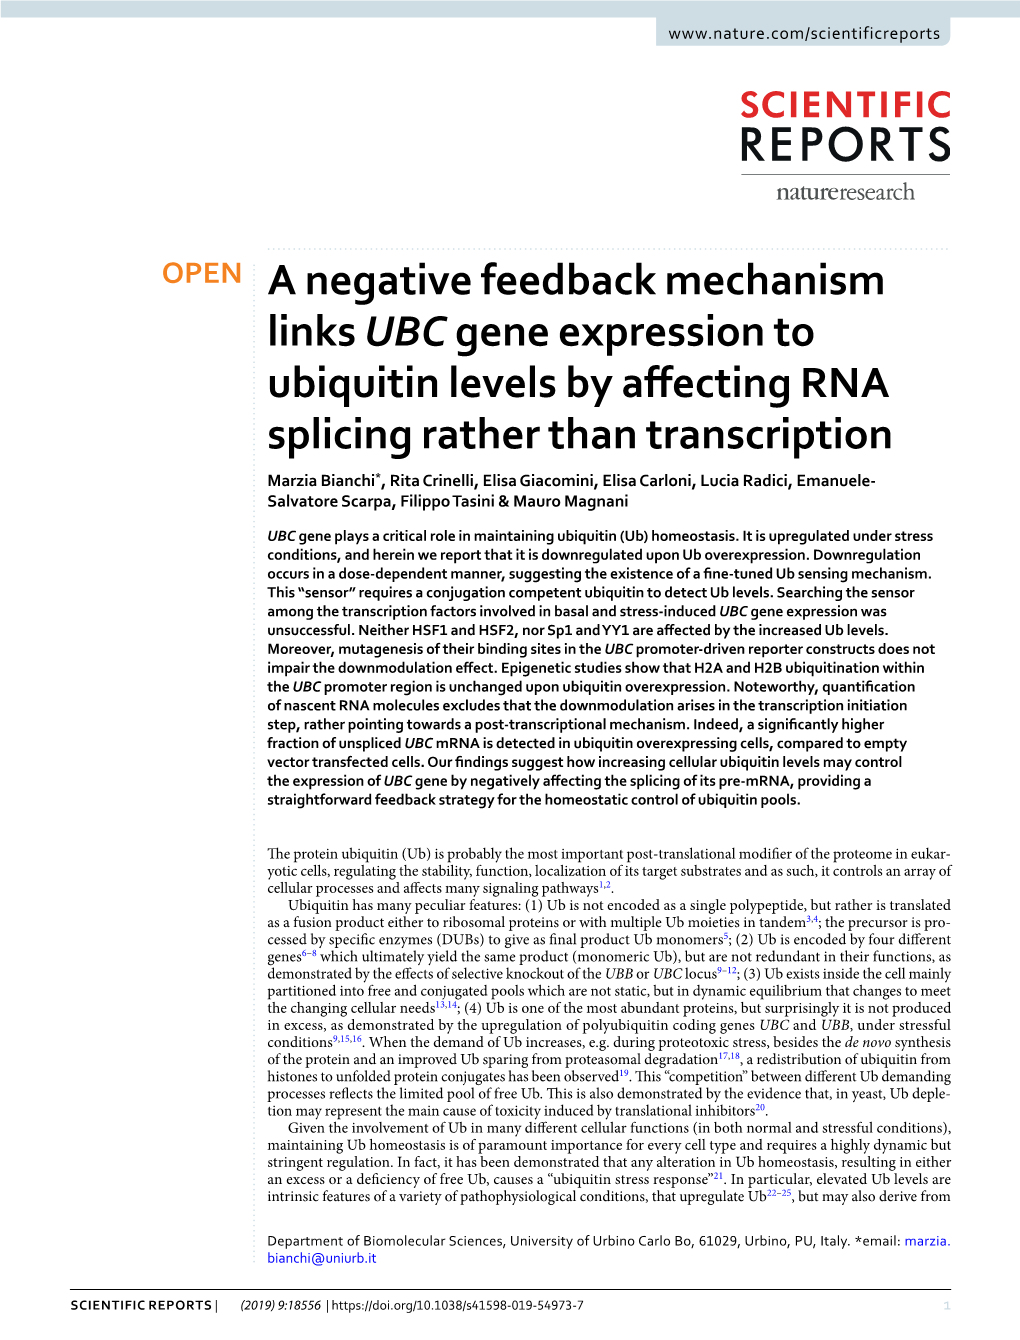 A Negative Feedback Mechanism Links UBC Gene Expression to Ubiquitin Levels by Affecting RNA Splicing Rather Than Transcription